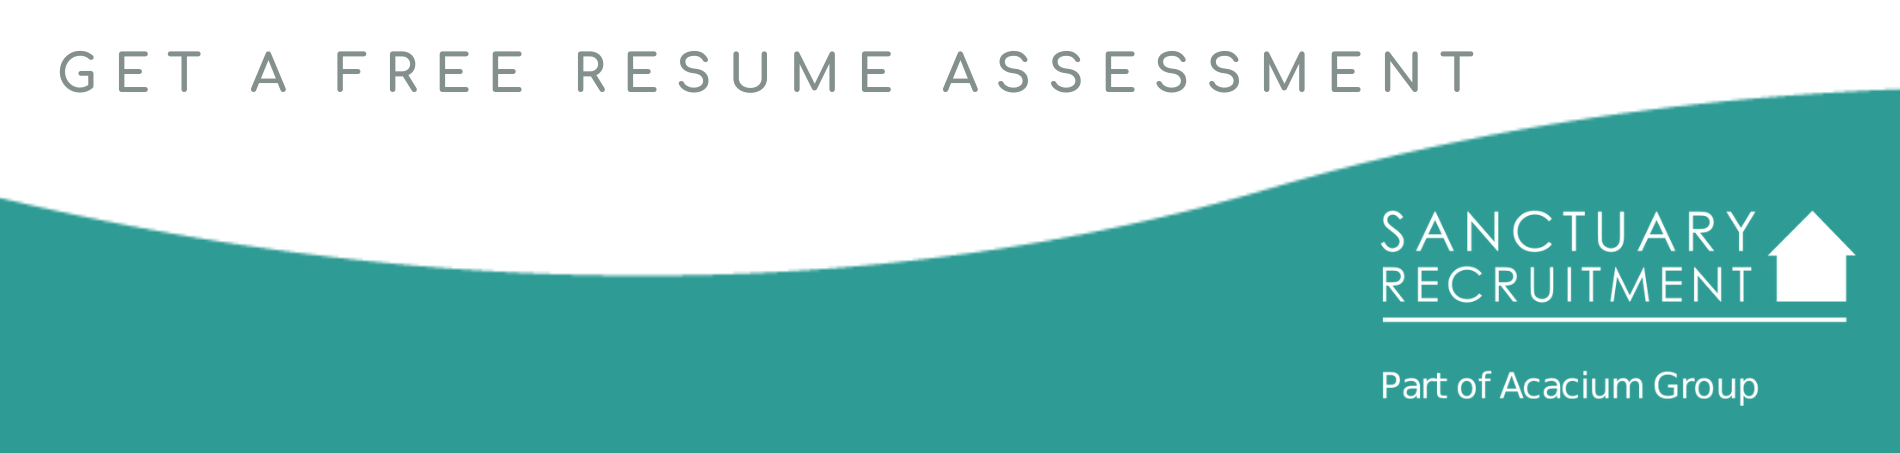 get a free resume assessment